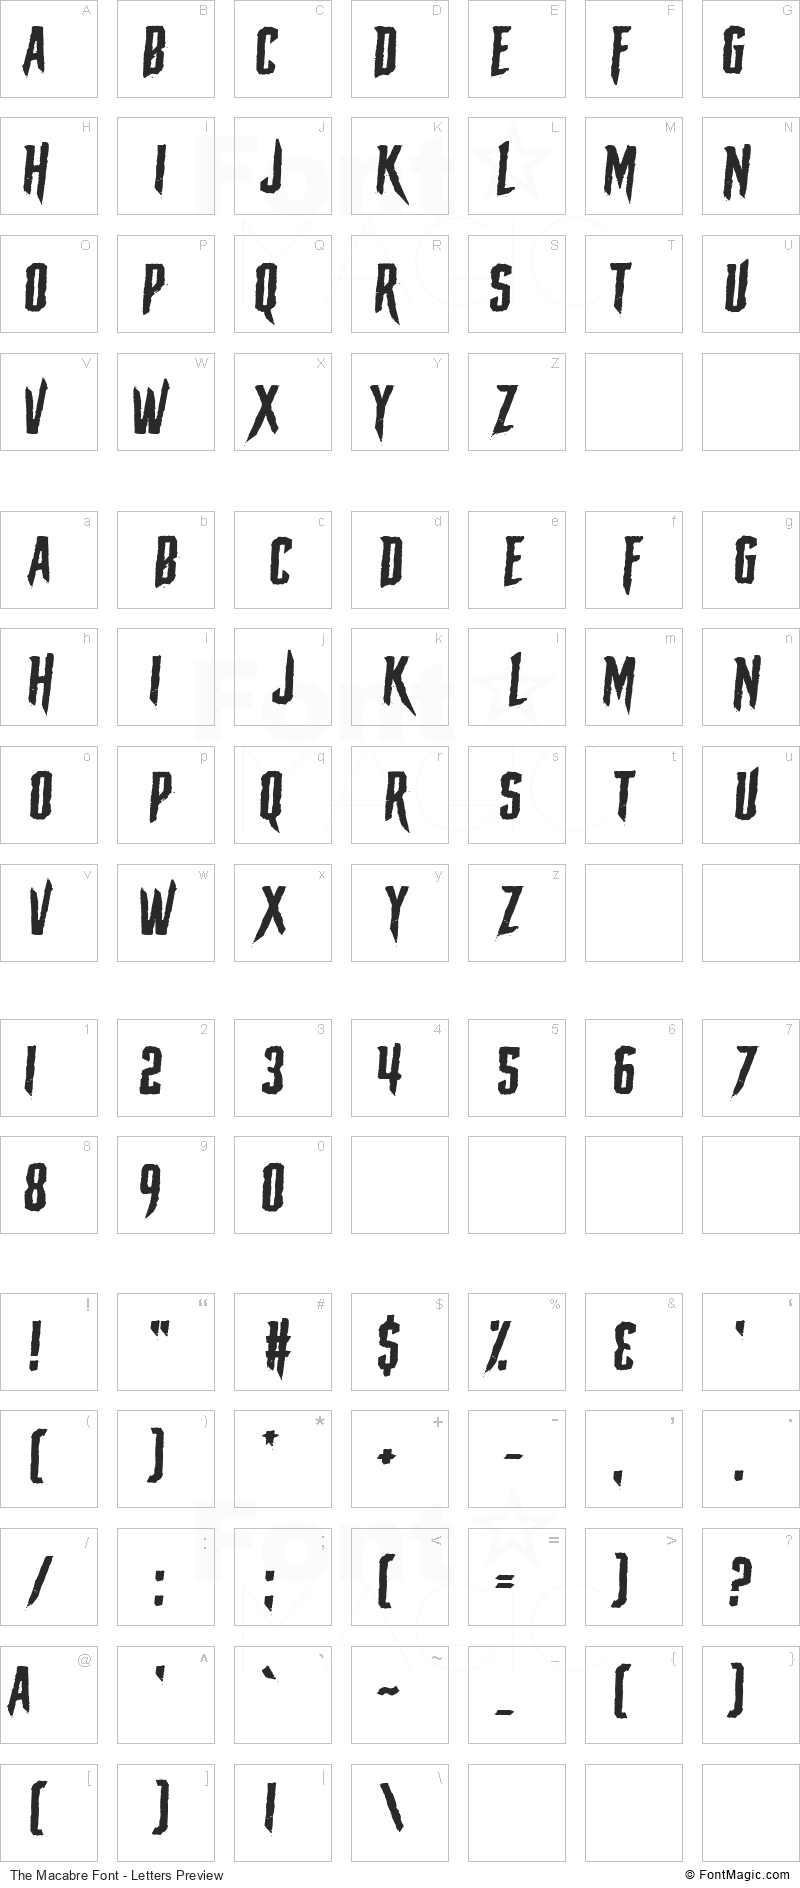 The Macabre Font - All Latters Preview Chart